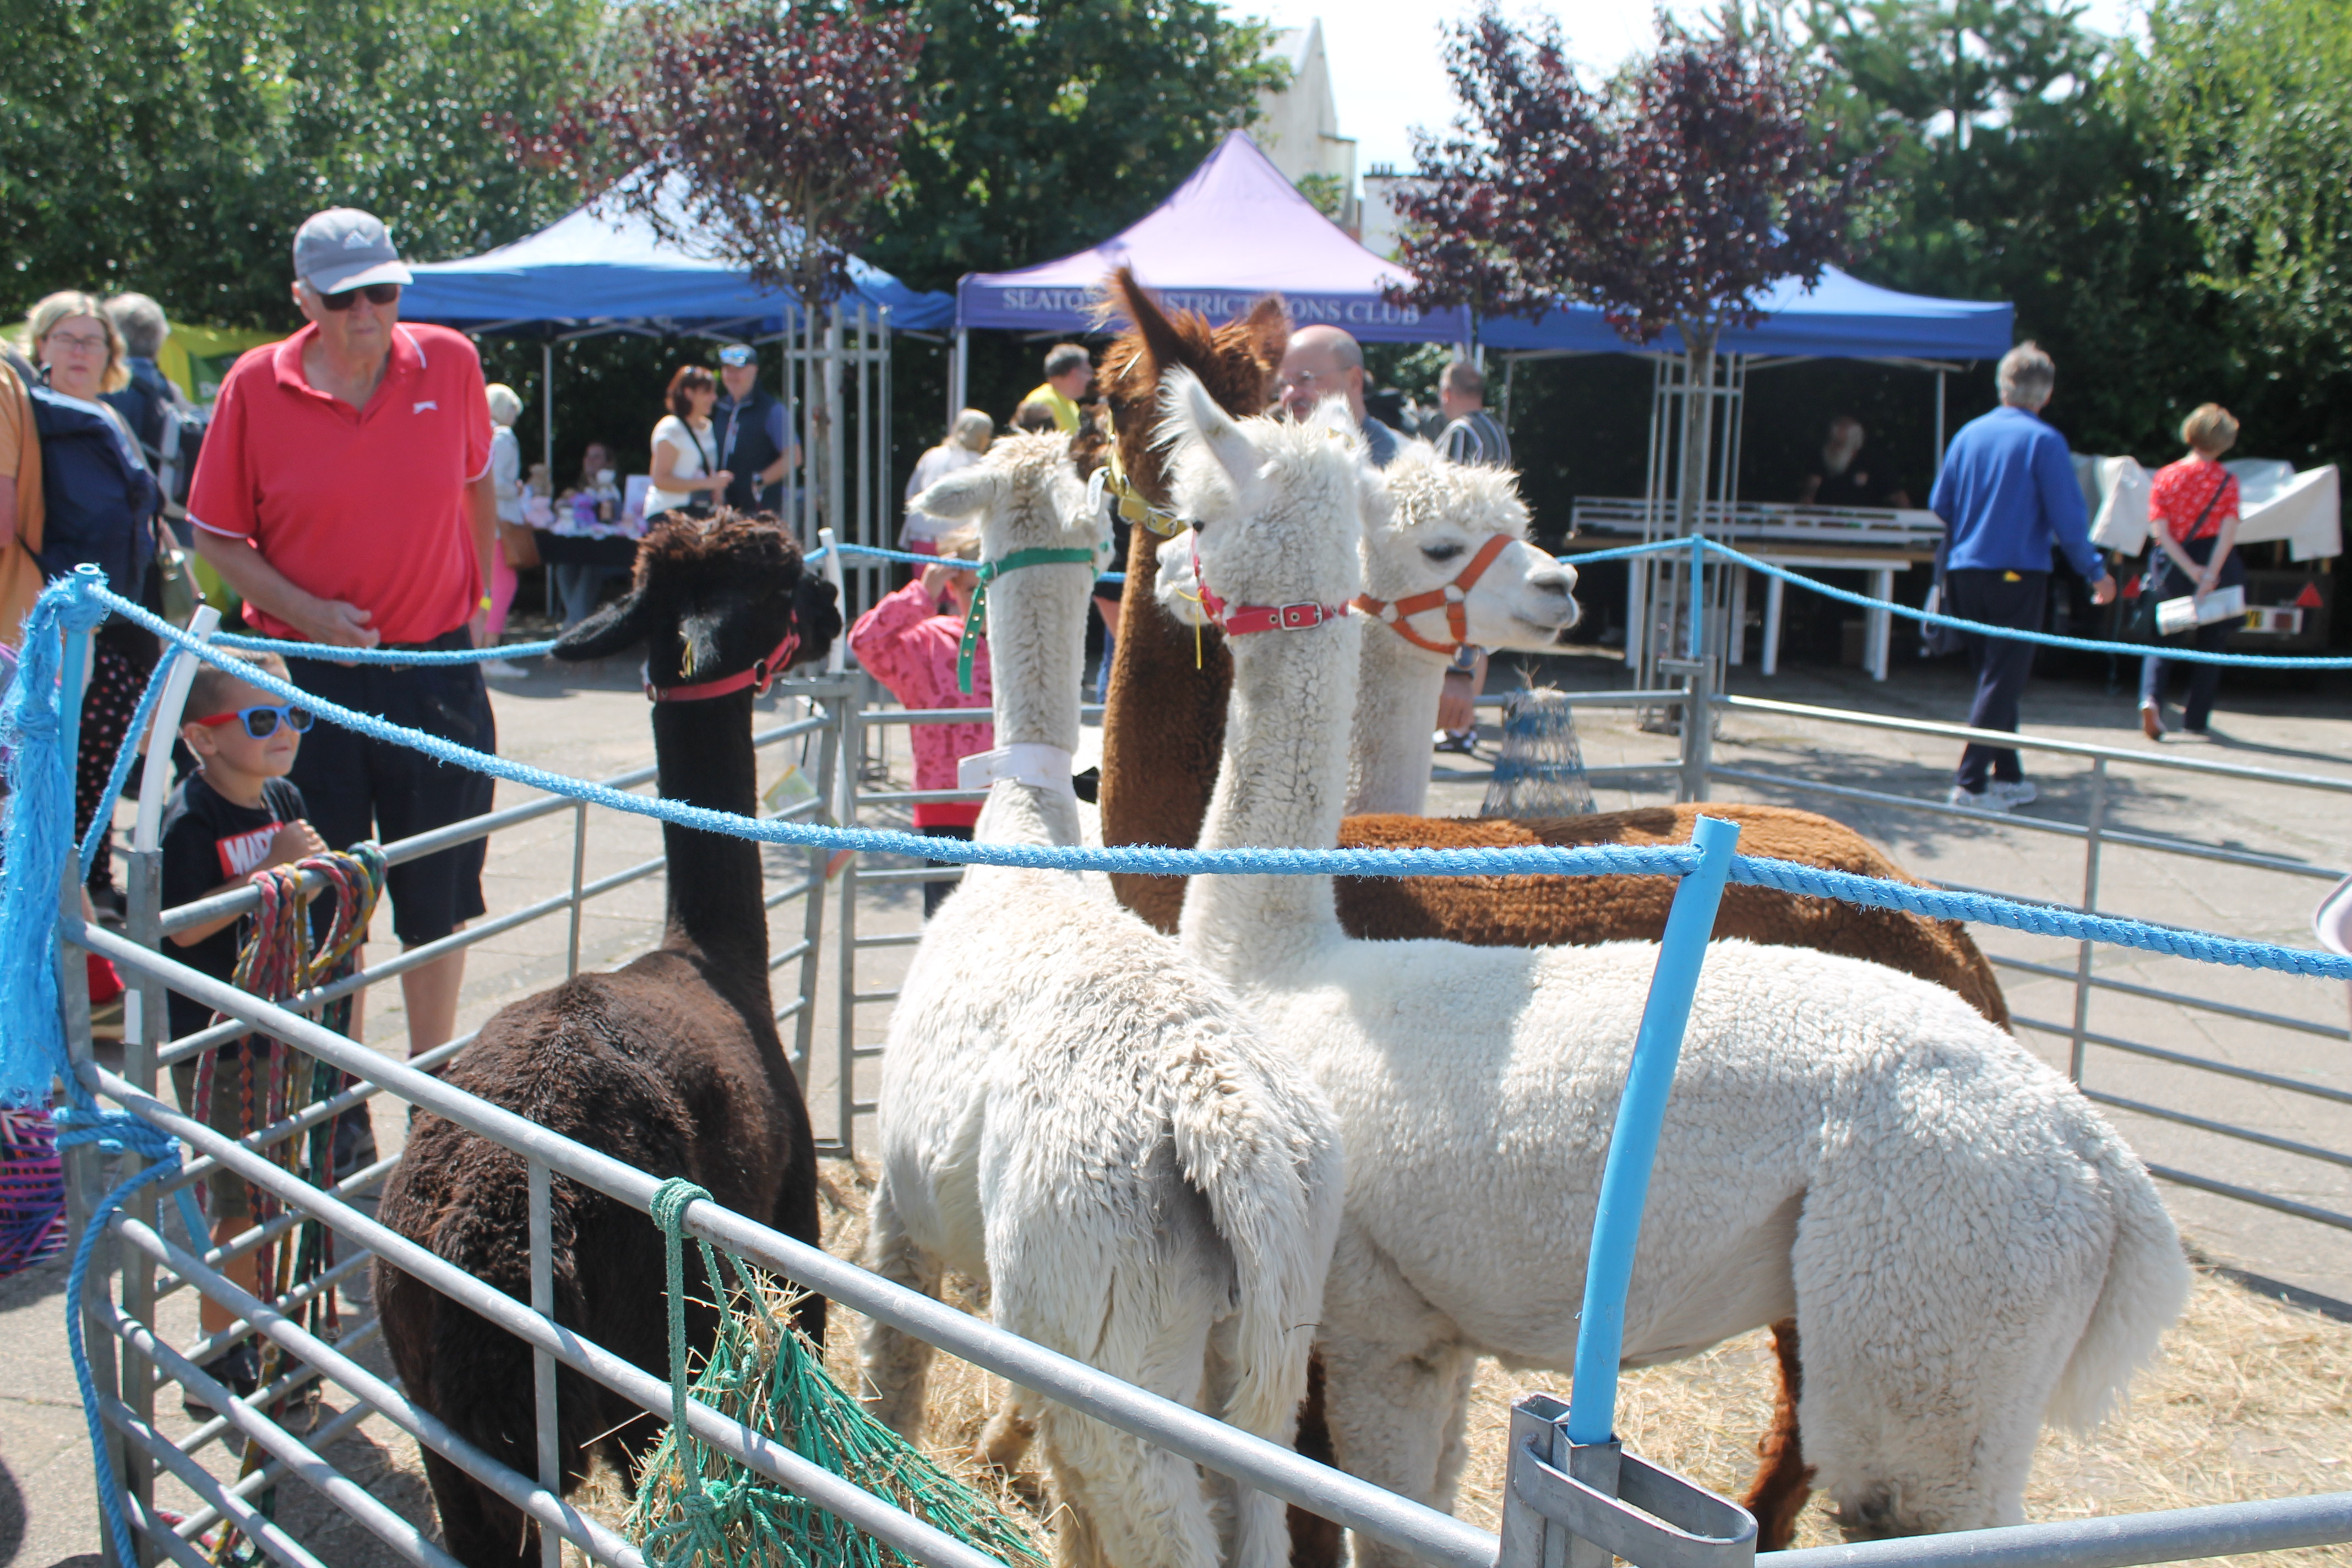 Visitors got up close with alpacas on the Tesco plaza